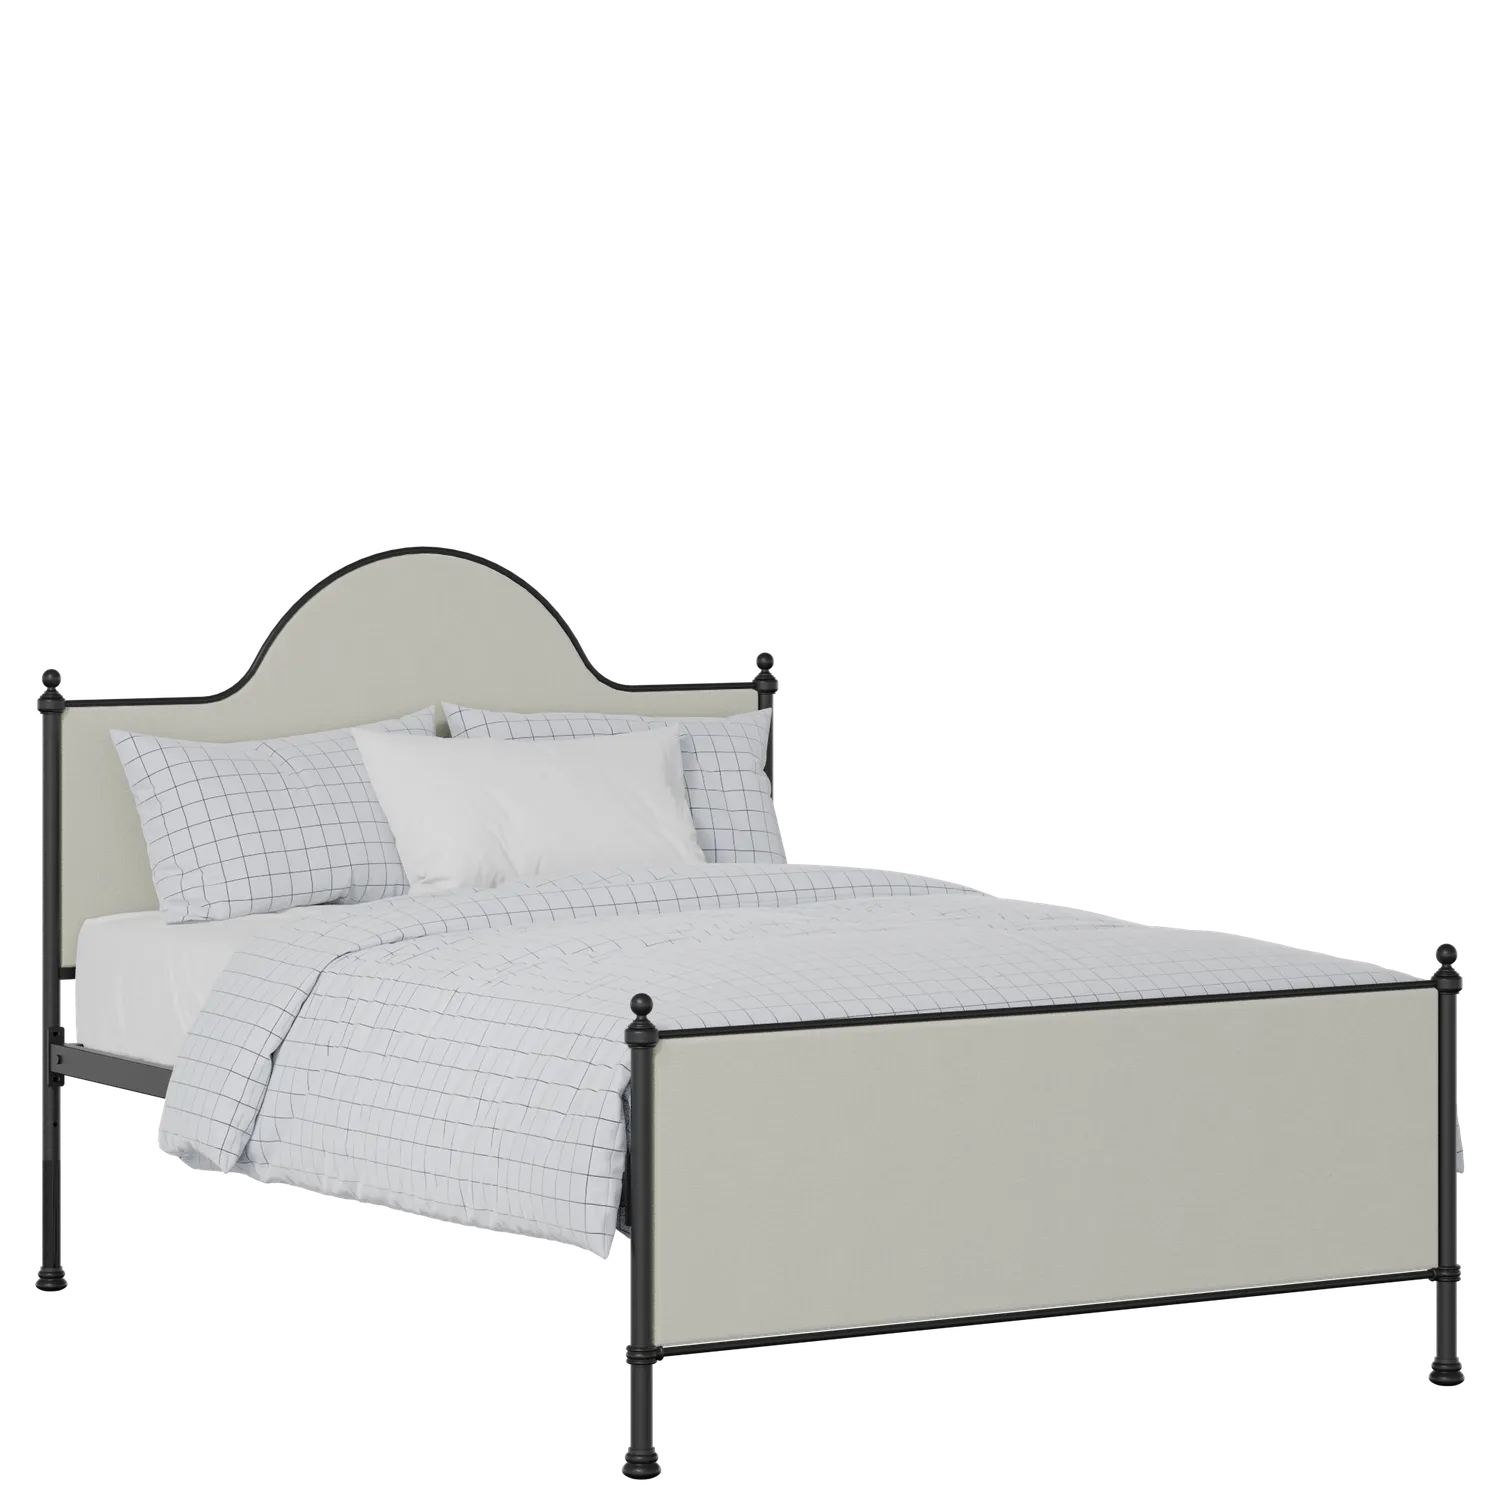 Albert iron/metal upholstered bed in black with oatmeal fabric